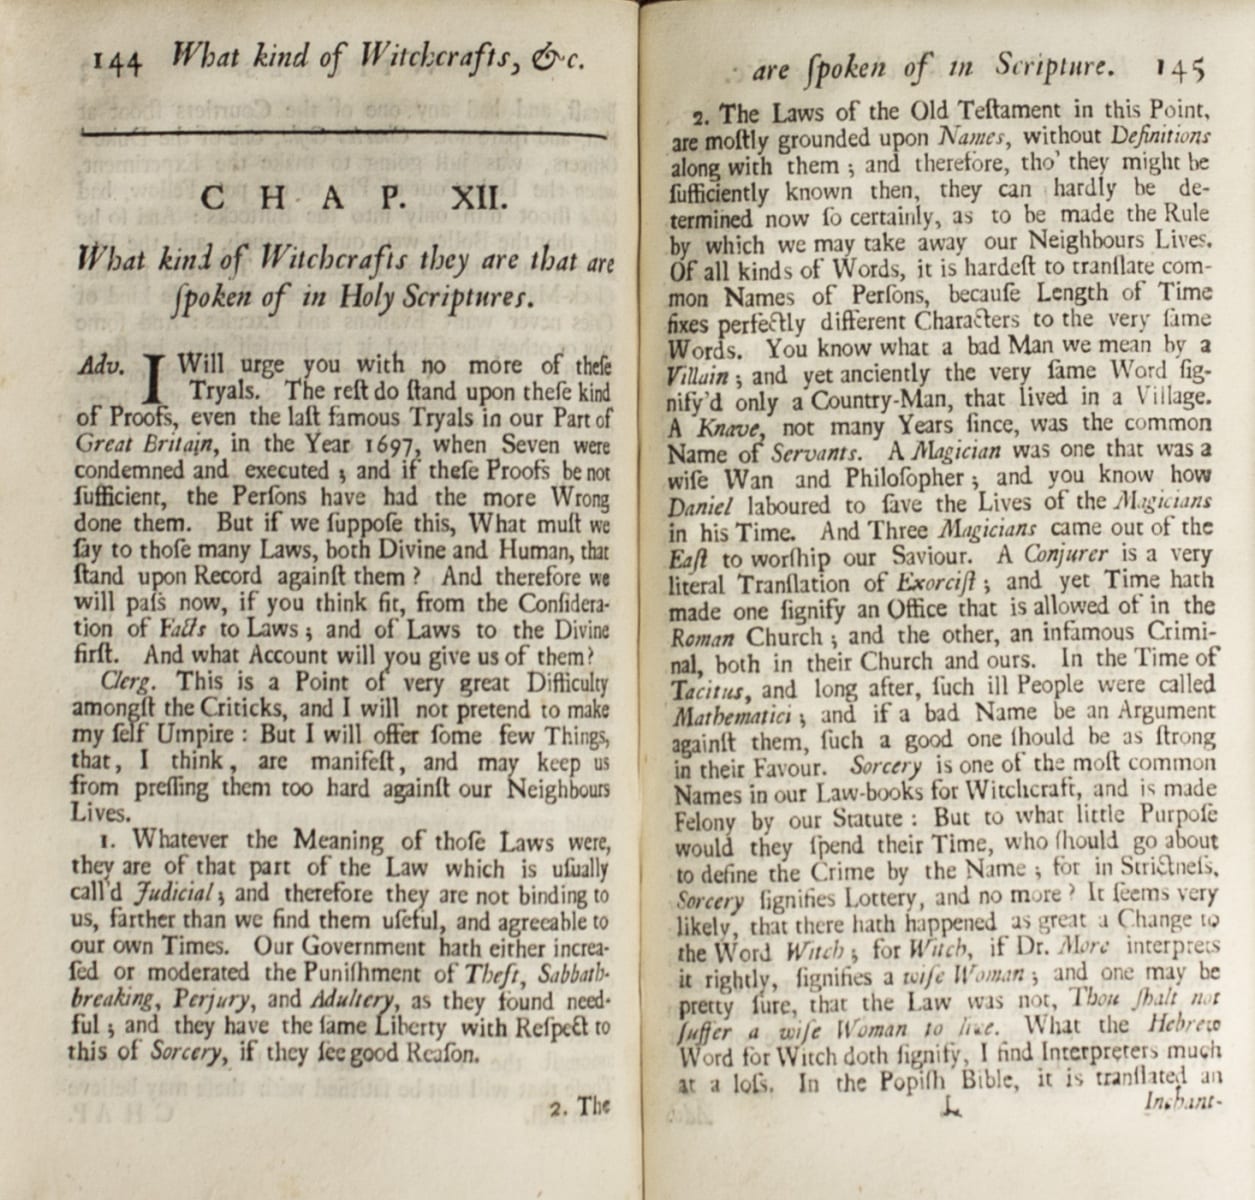 View full sized image: Hutchinson, Francis, 1660-1739. An historical essay concerning witchcraft...London: Printed for R. Knaplock...and D. Midwinter...1718